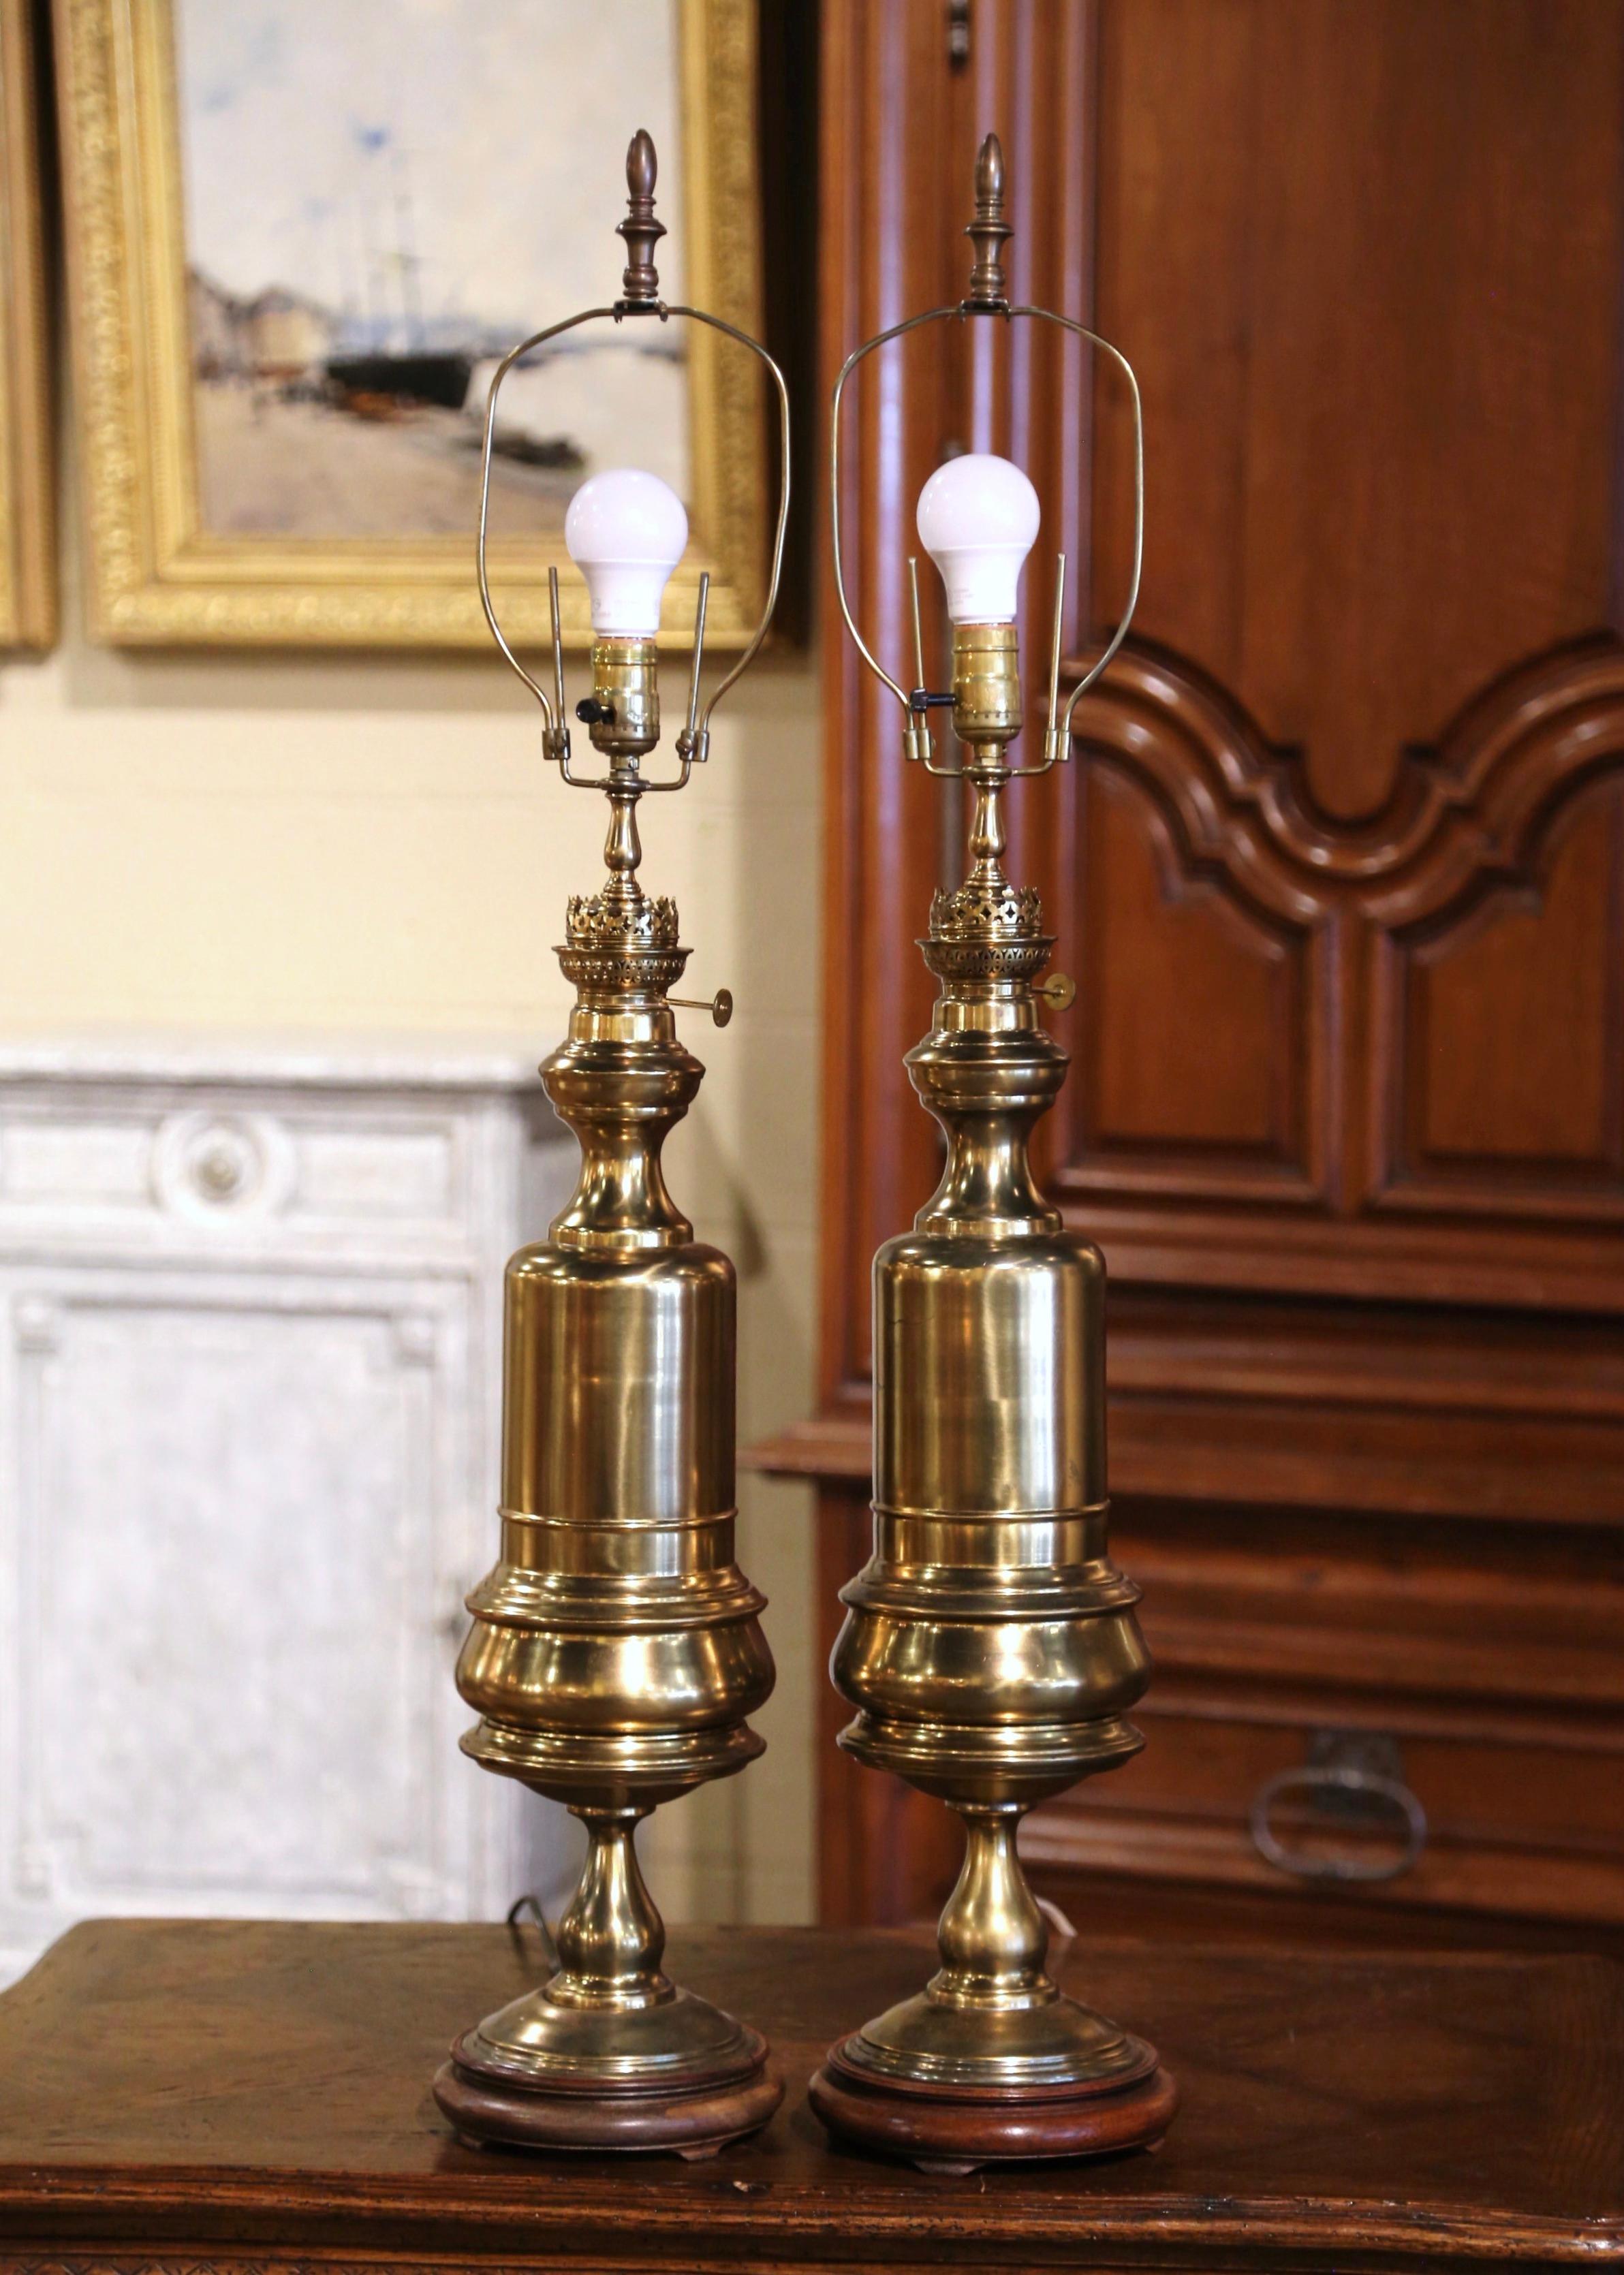 These elegant antique oil lamps made into table lights were crafted in France, circa 1880. The tall 